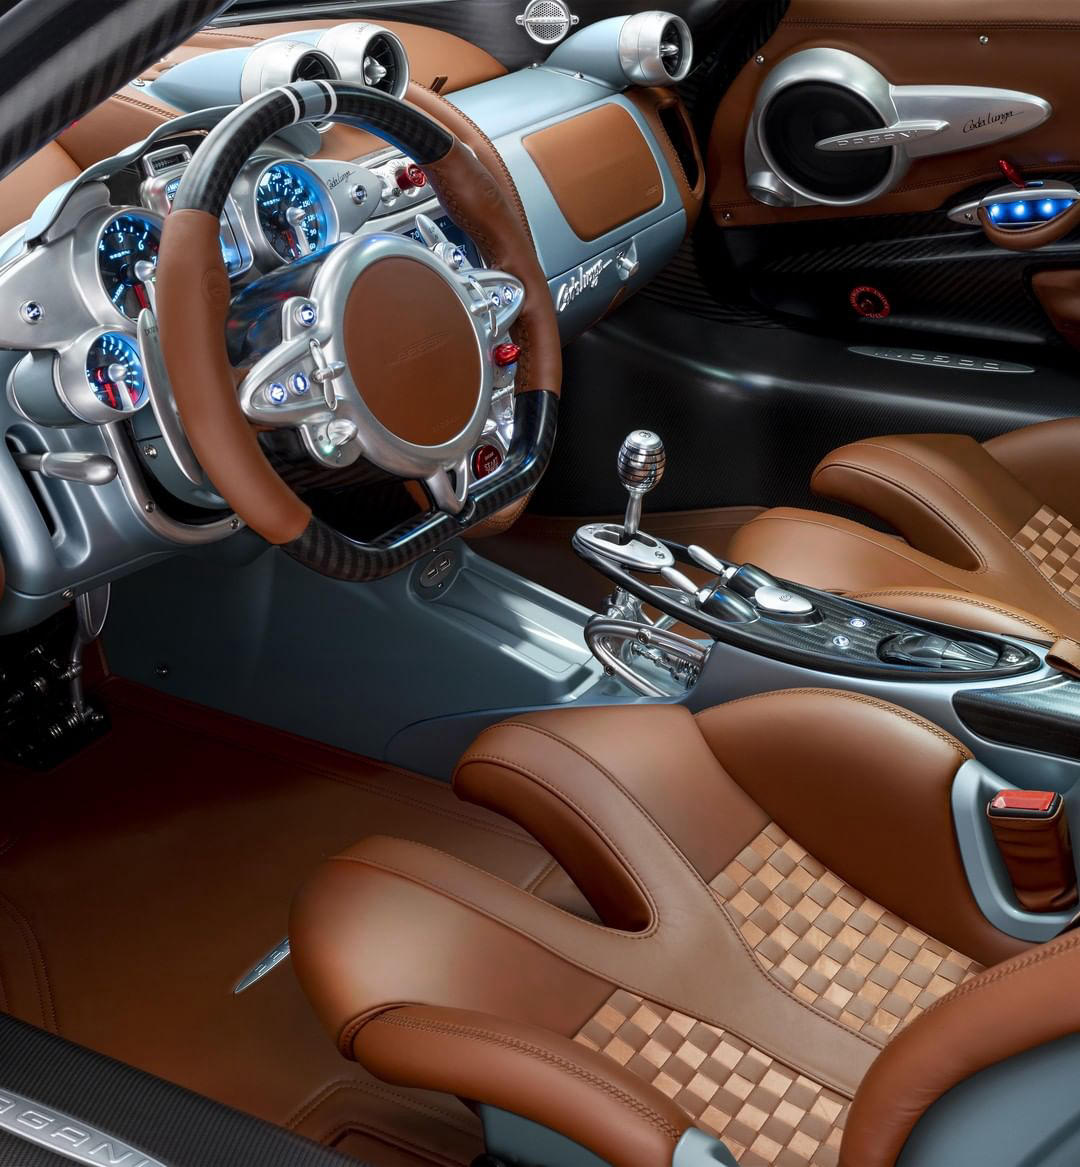 Pagani Automobili Official - Inside the #HuayraCodalunga there is an elegant atmosphere, characteriz